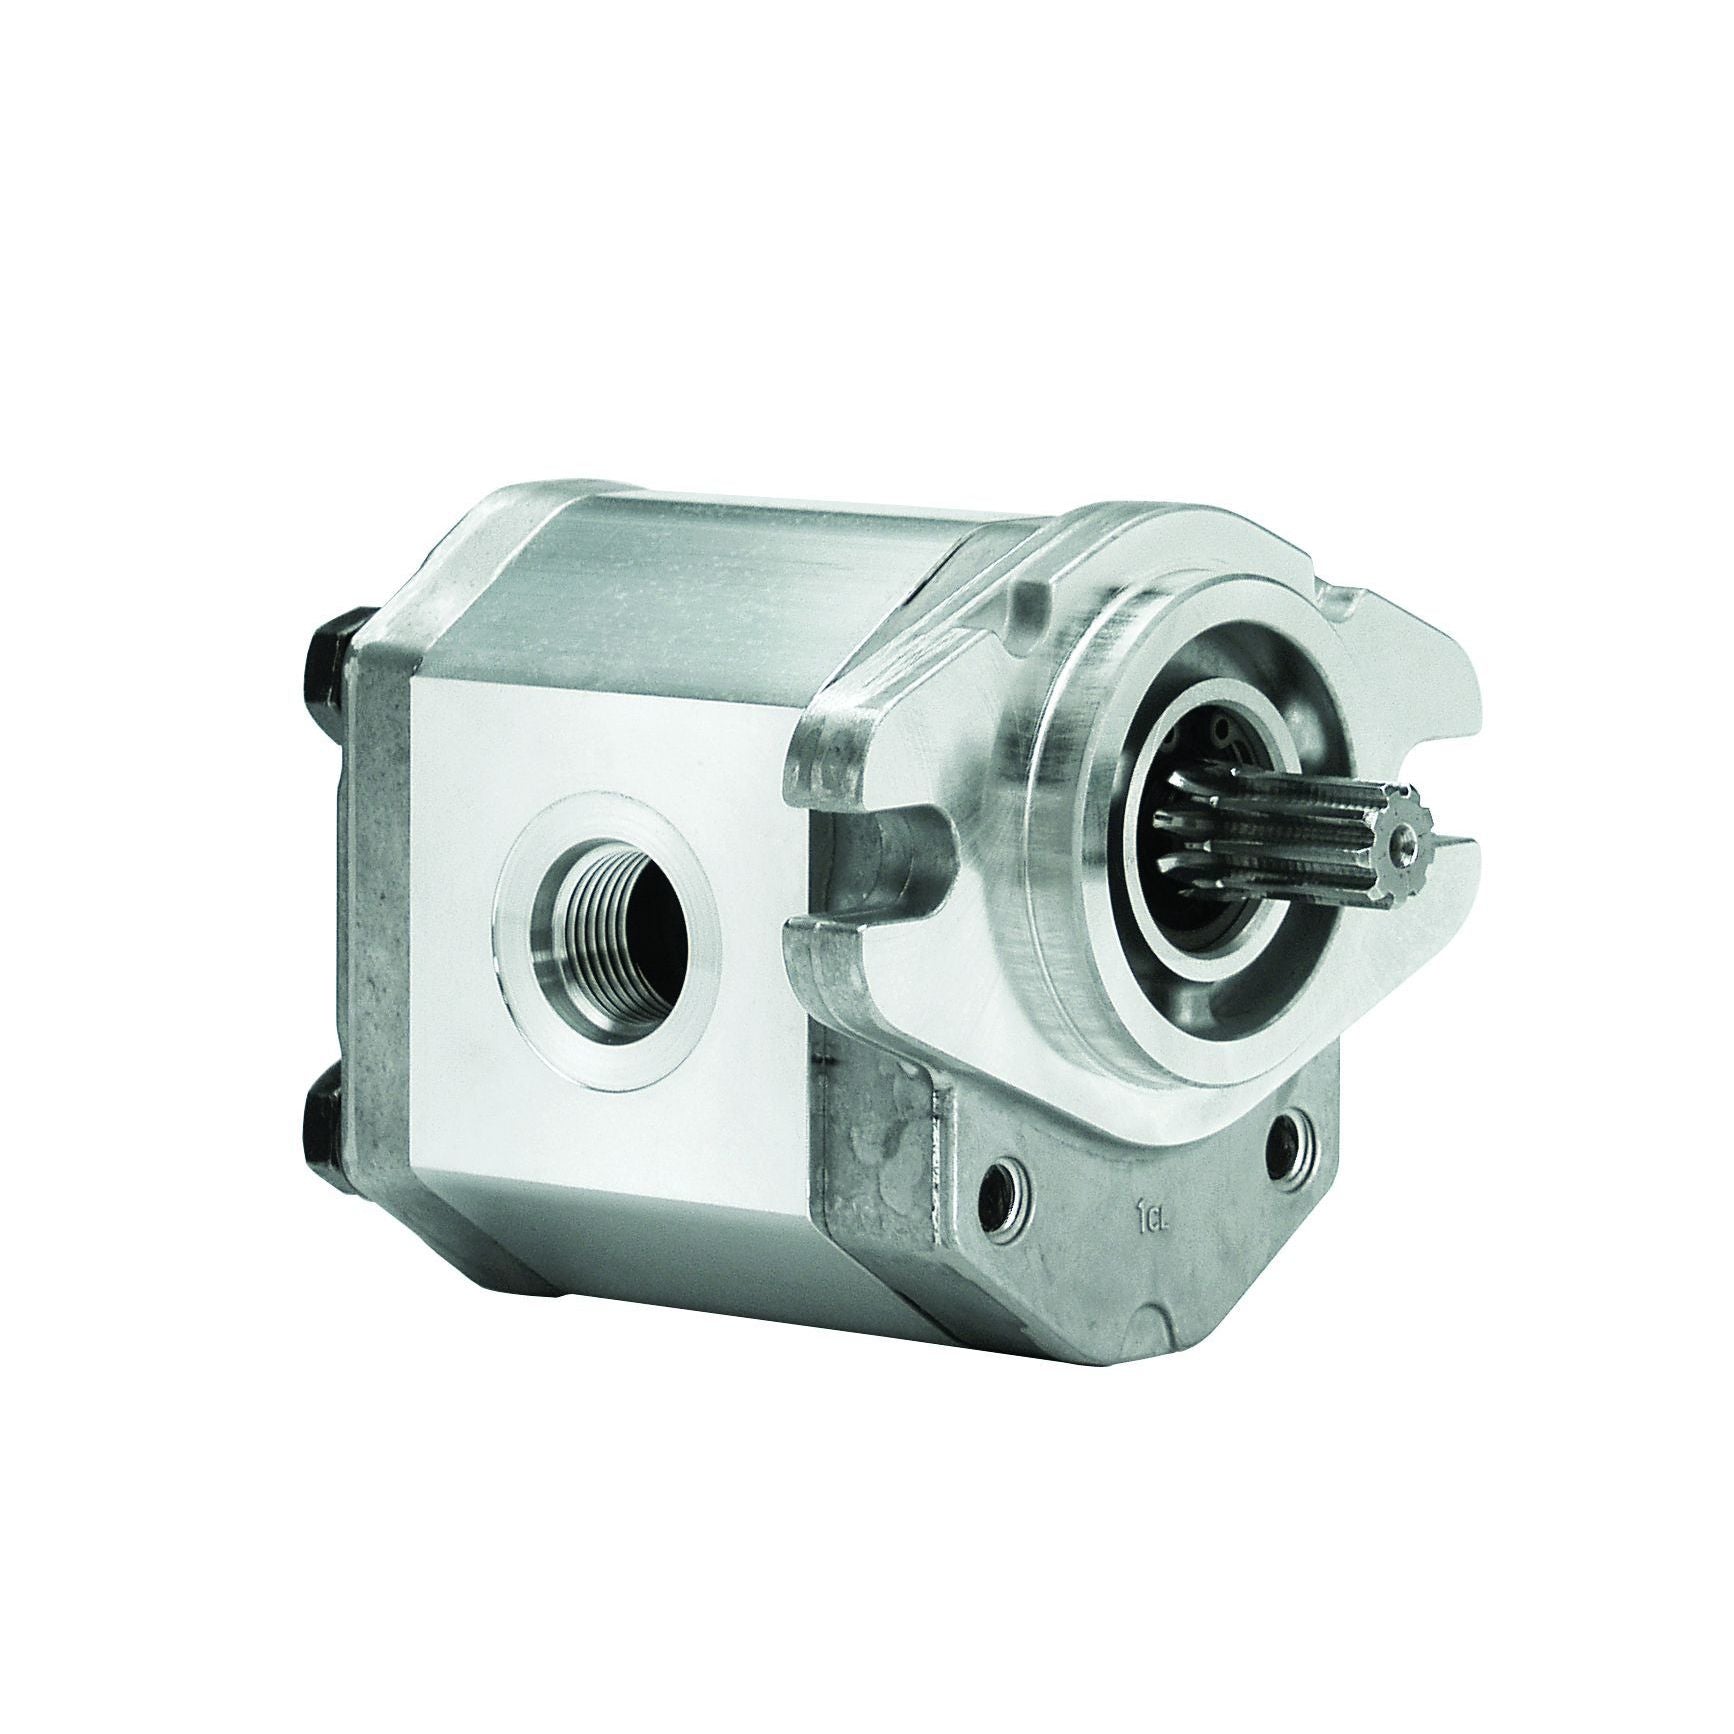 ALP3A-D-66-S1-FA : Marzocchi Gear Pump, CW, 44cc (2.684in3), 20.91 GPM, 3045psi, 2800 RPM, #20 SAE (1.25") In, #12 SAE (3/4") Out, Splined Shaft 13T 16/32DP, SAE B 2-Bolt Mount